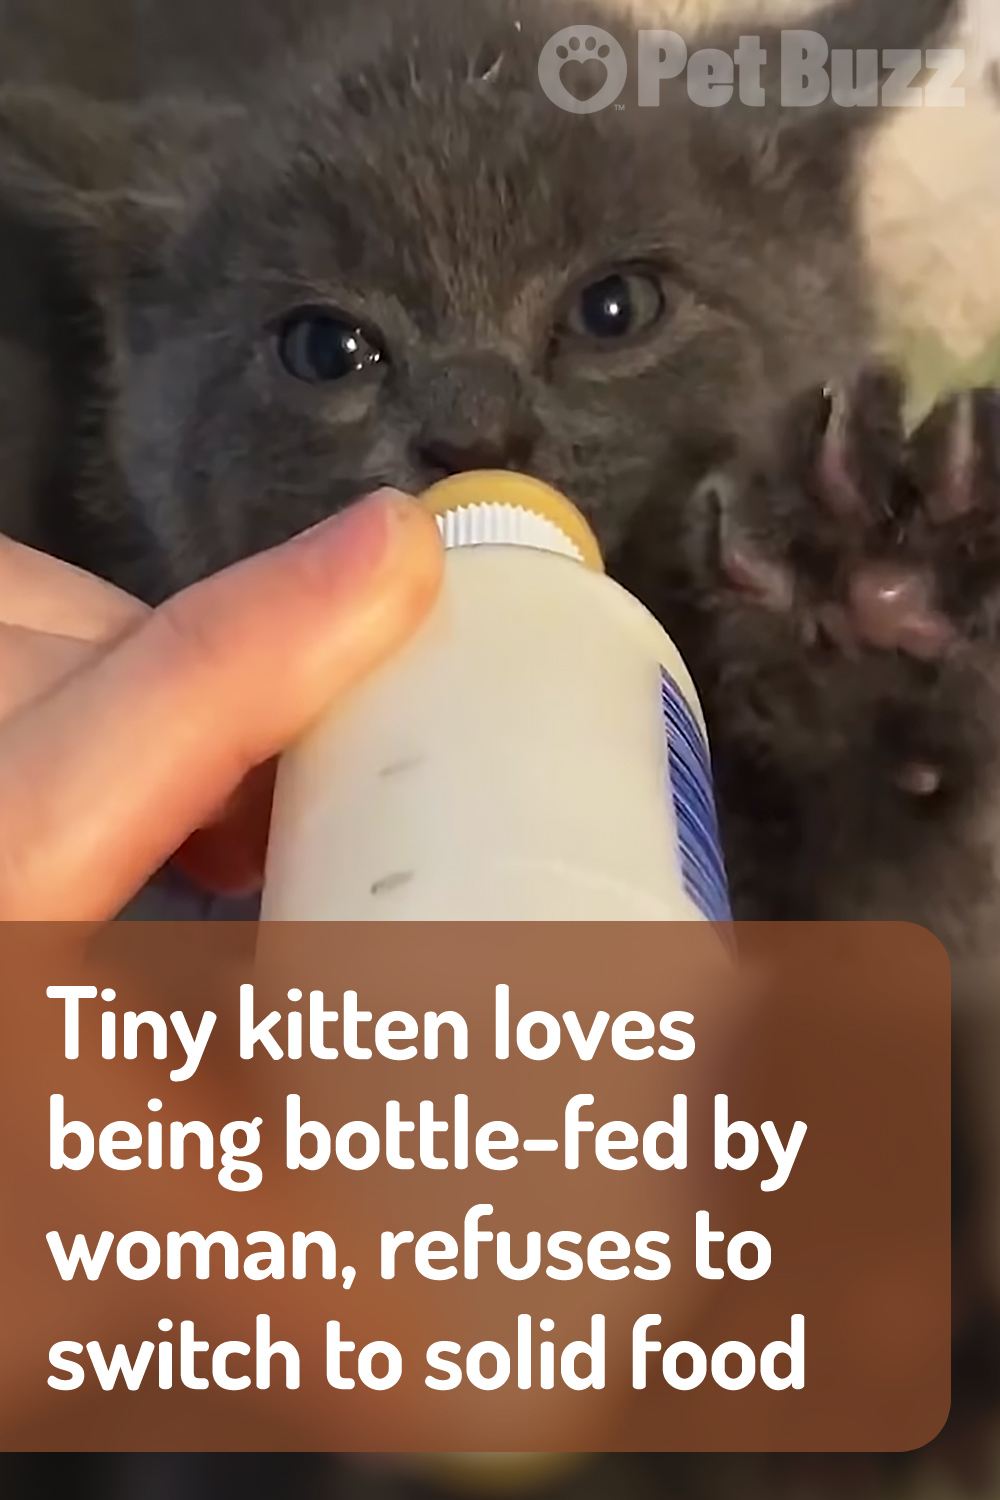 Tiny kitten loves being bottle-fed by woman, refuses to switch to solid food